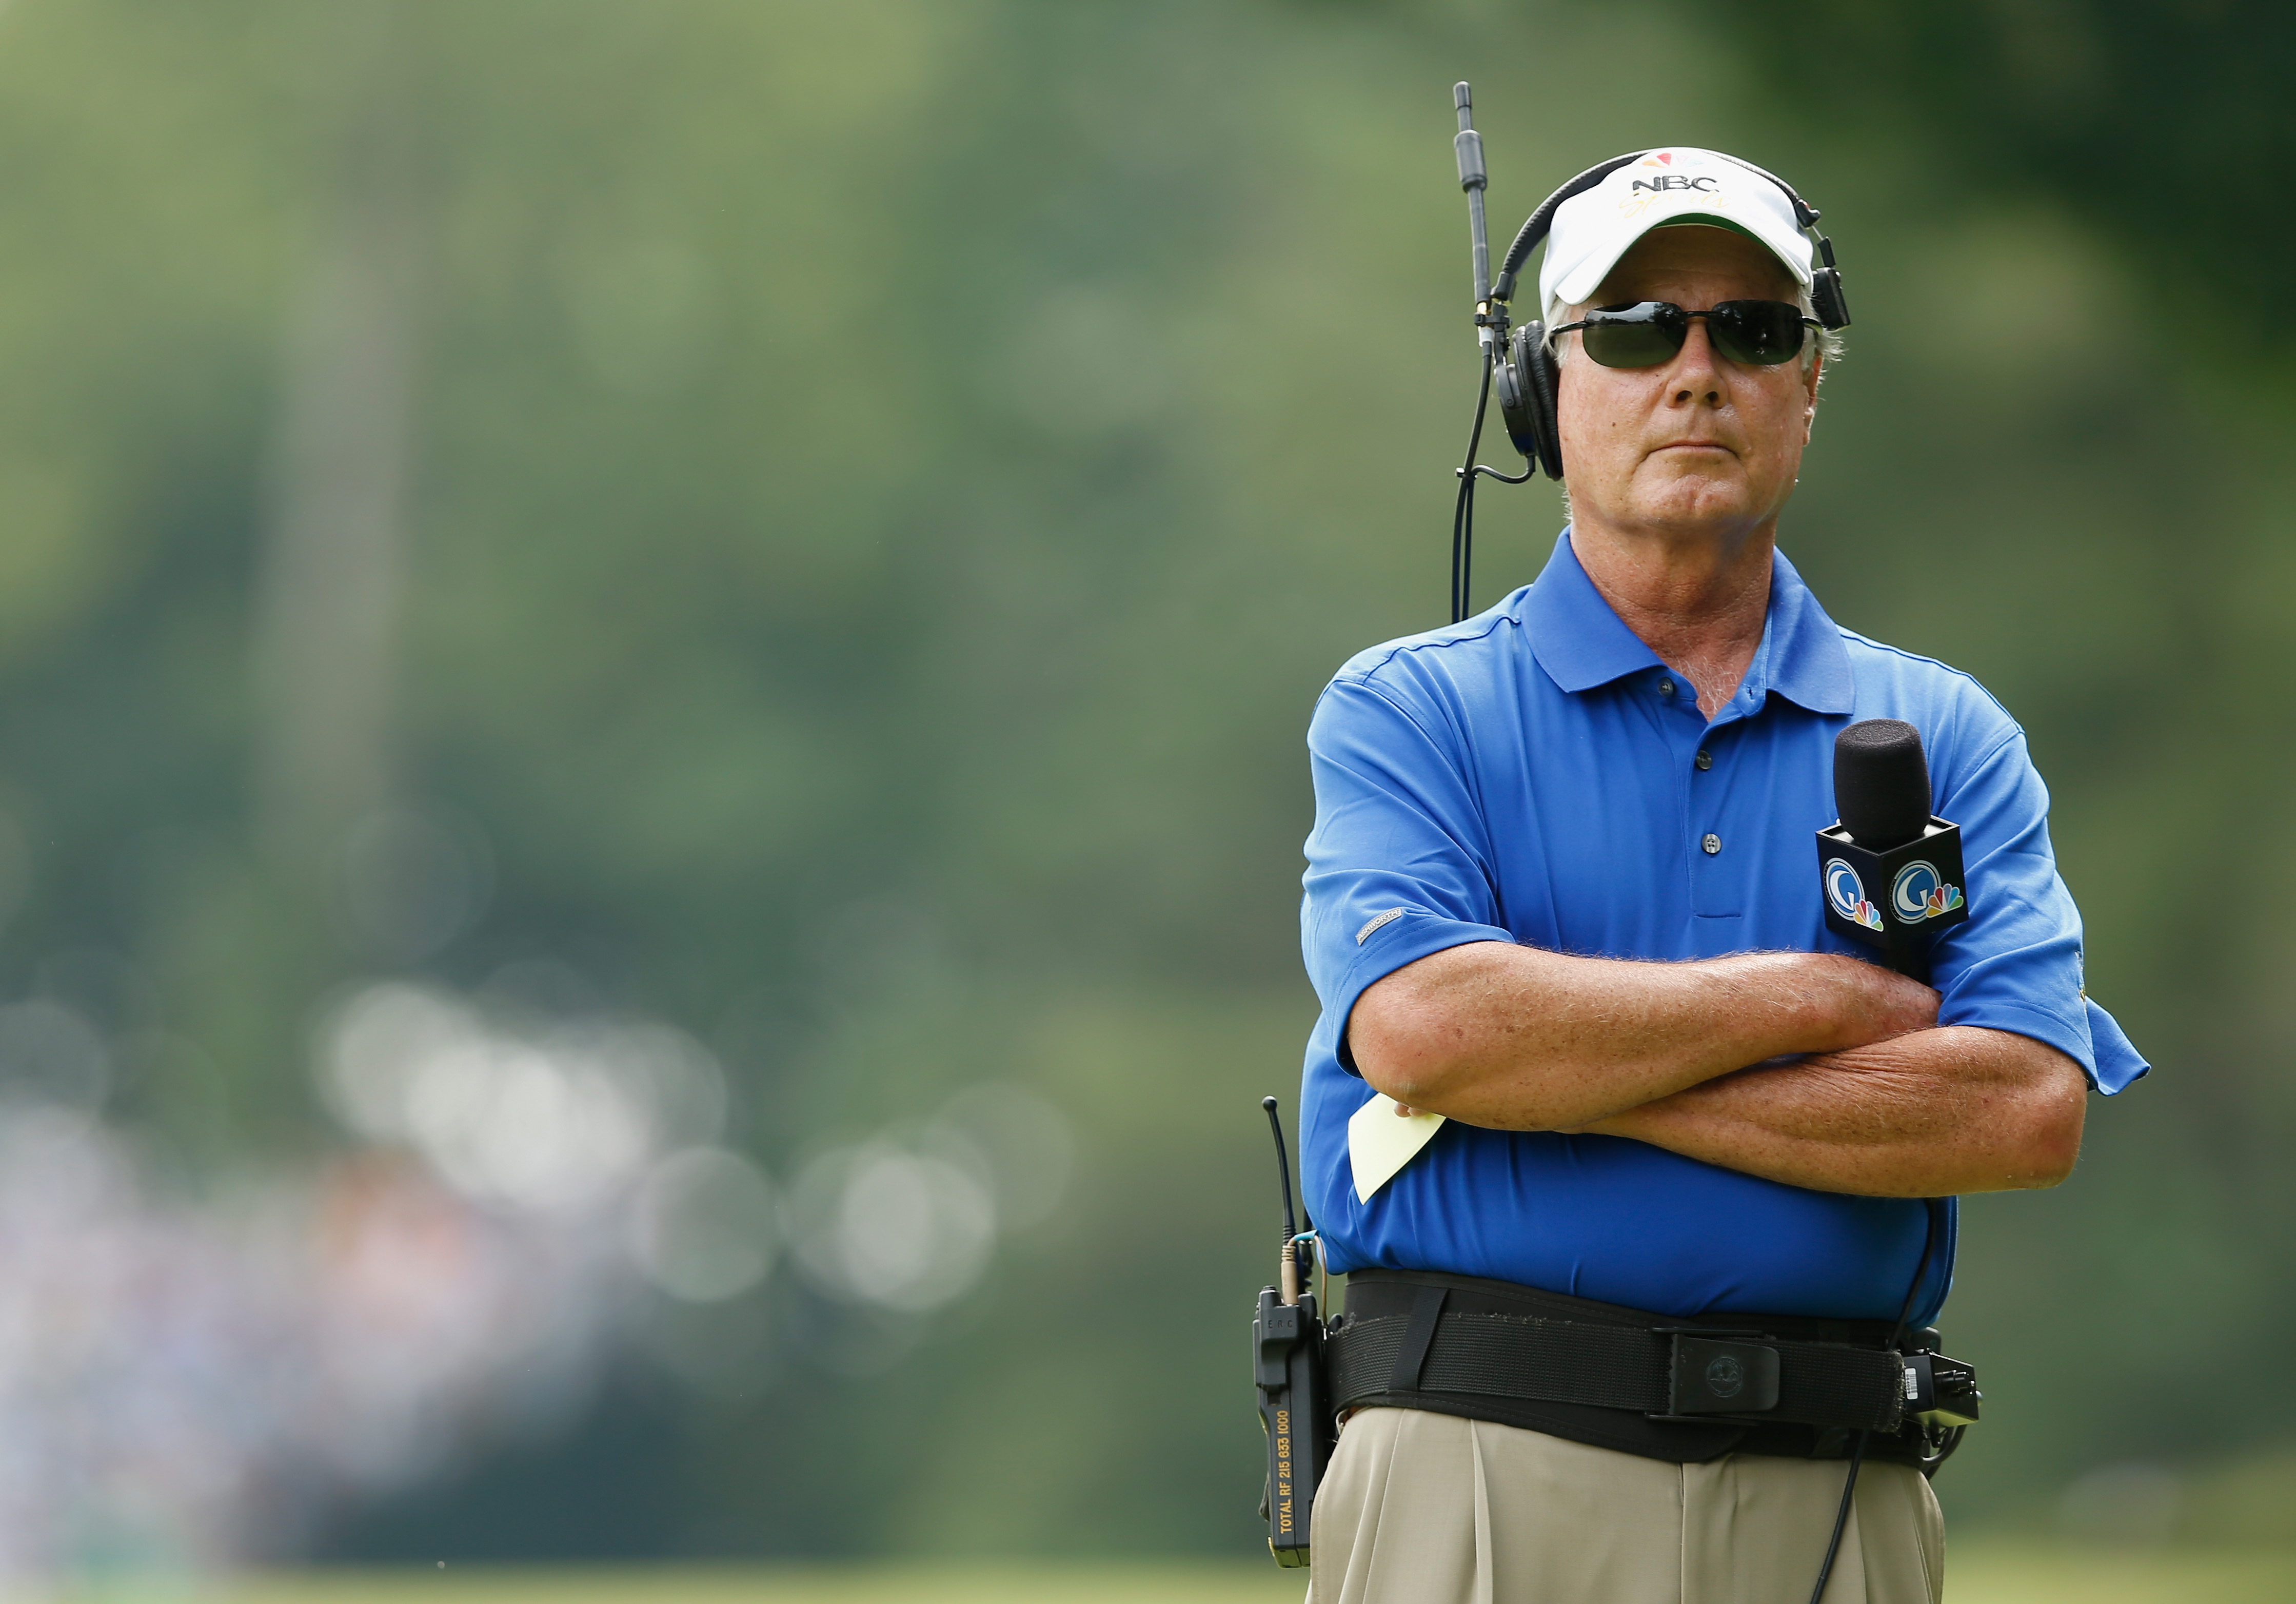 NBC/Golf Channels Mark Rolfing returns from cancer scare, will work T This is the Loop Golf Digest